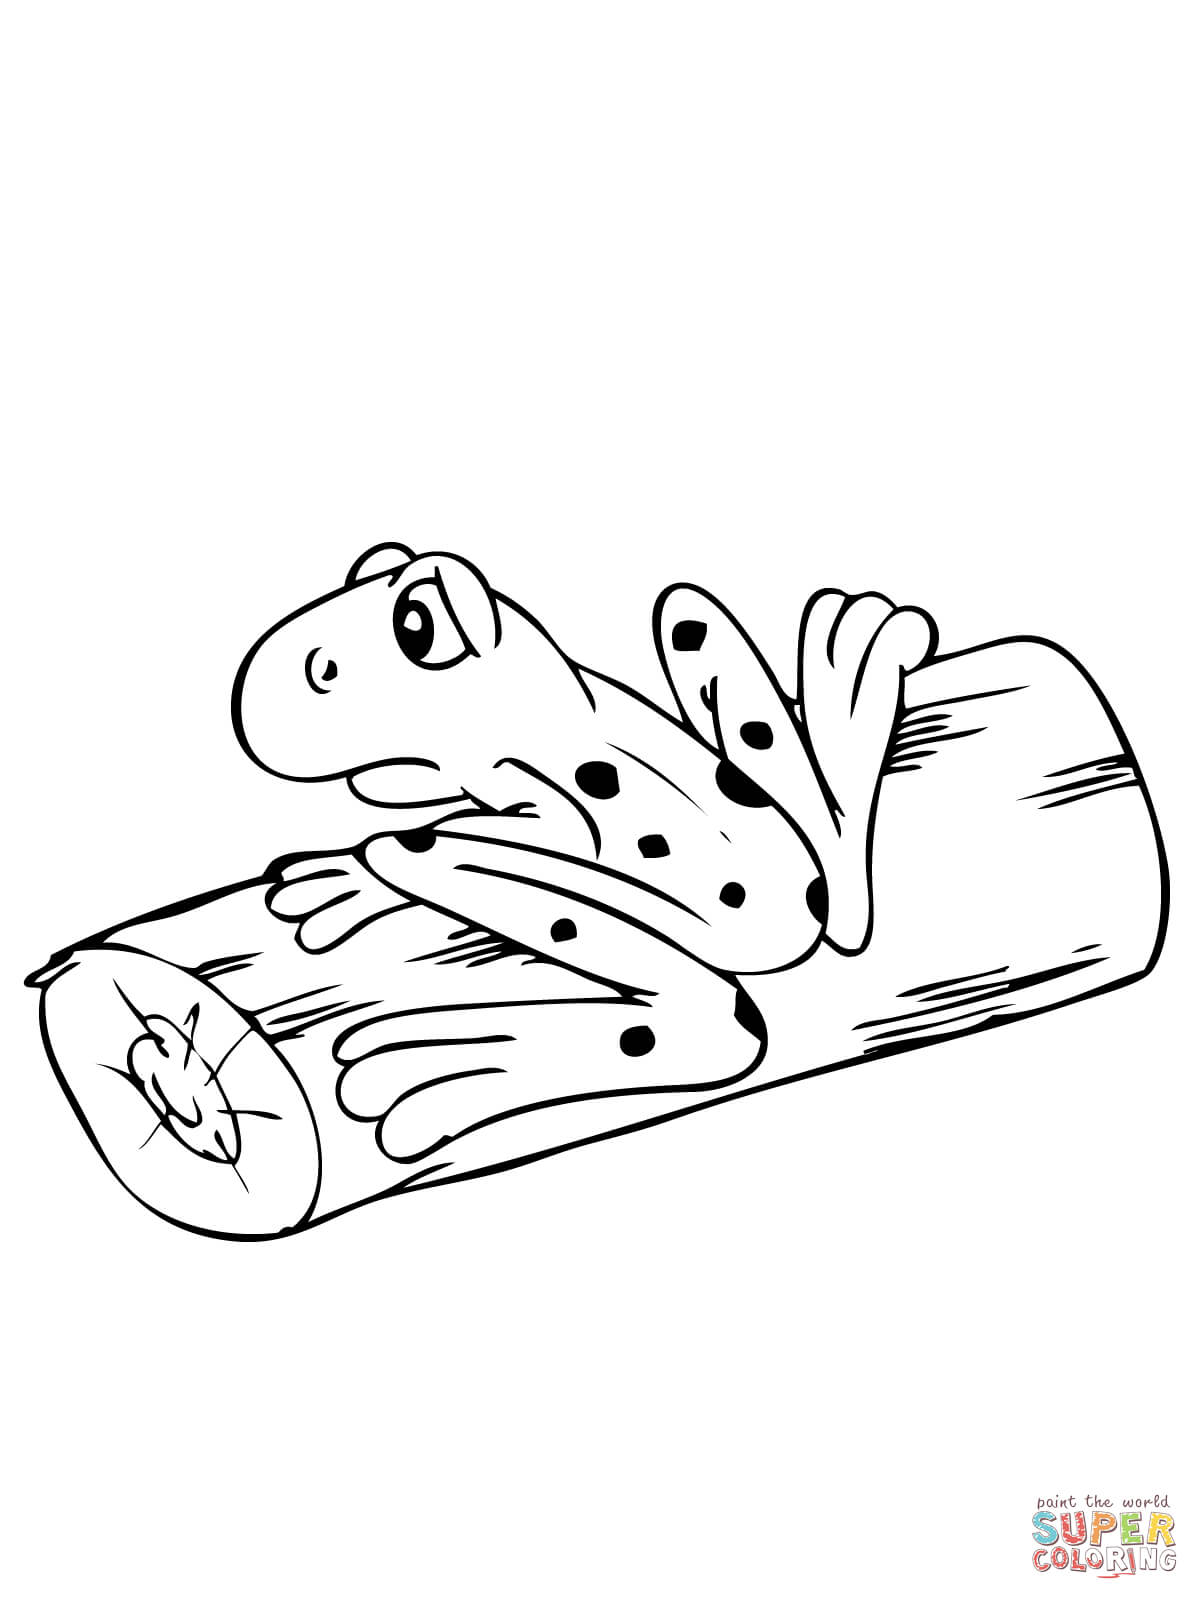 Frog on log coloring page free printable coloring pages